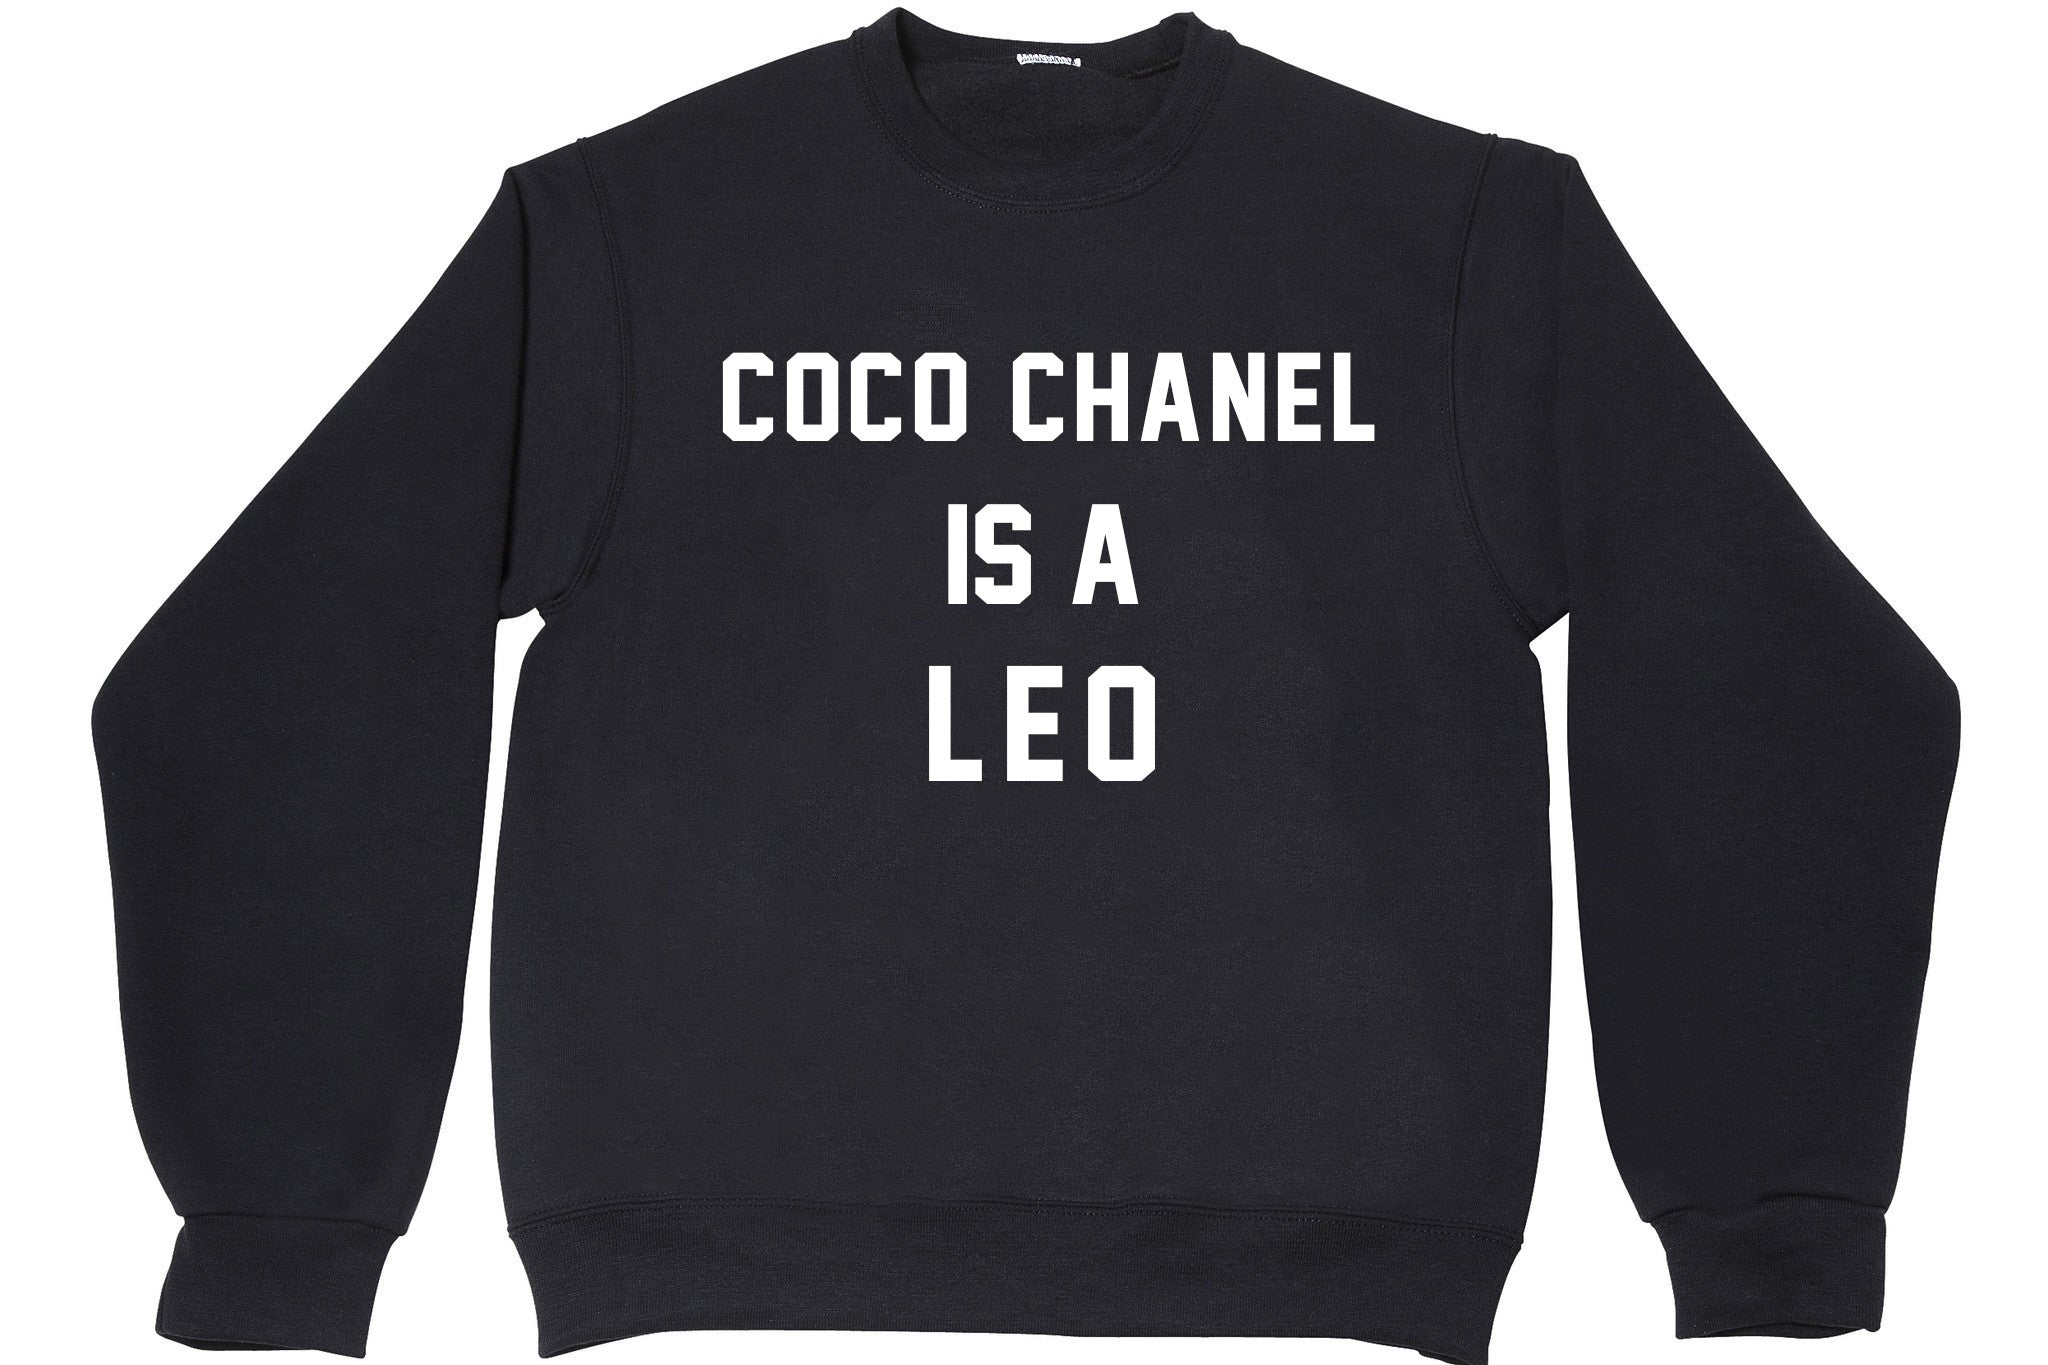 COCO CHANEL IS A LEO